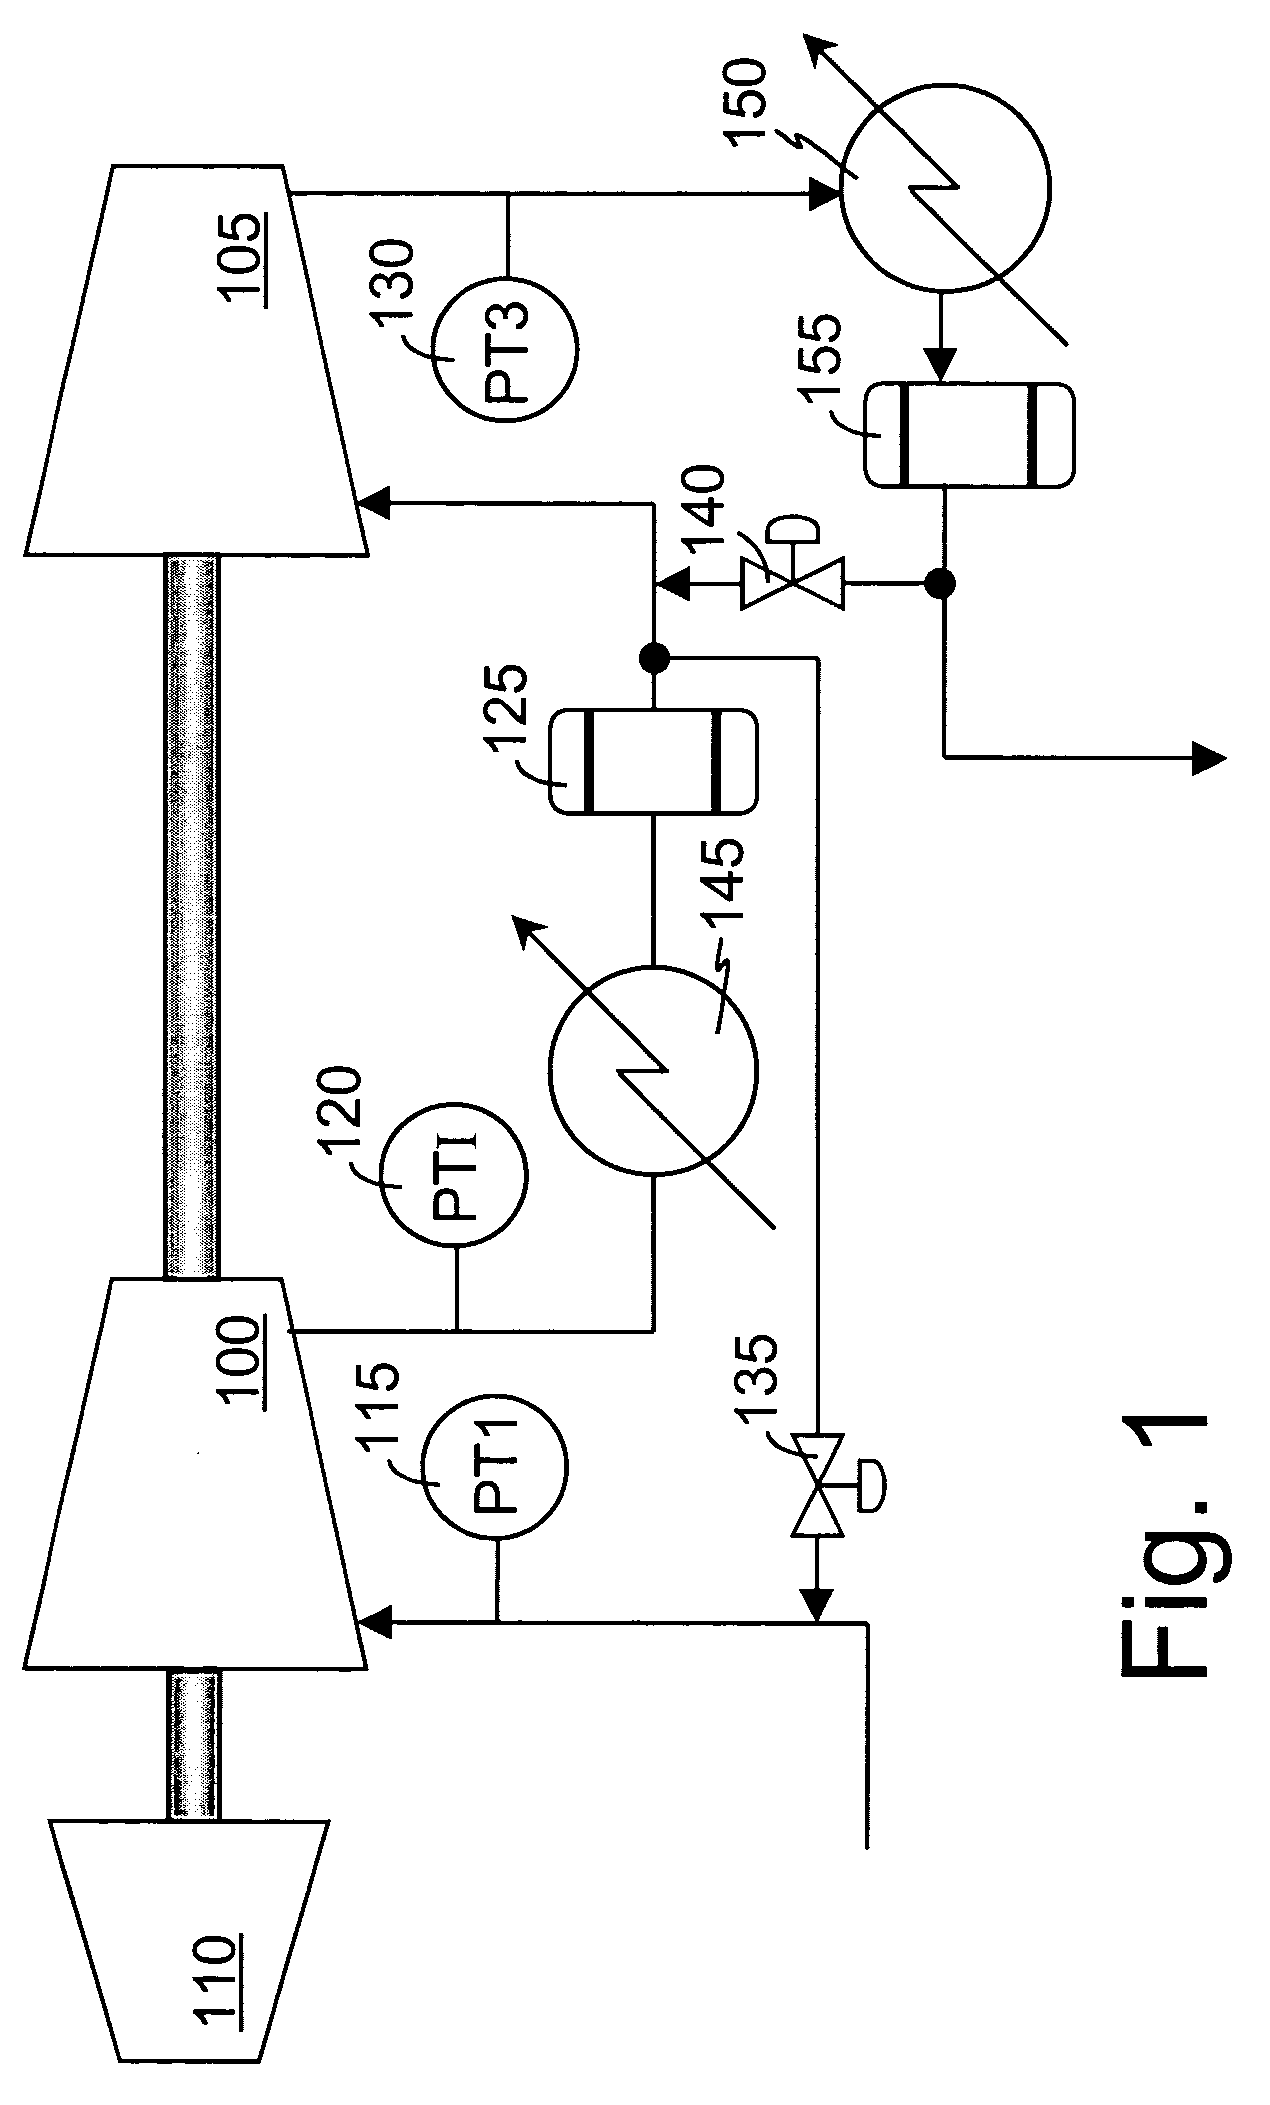 Method and apparatus for the prevention of critical process variable excursions in one or more turbomachines